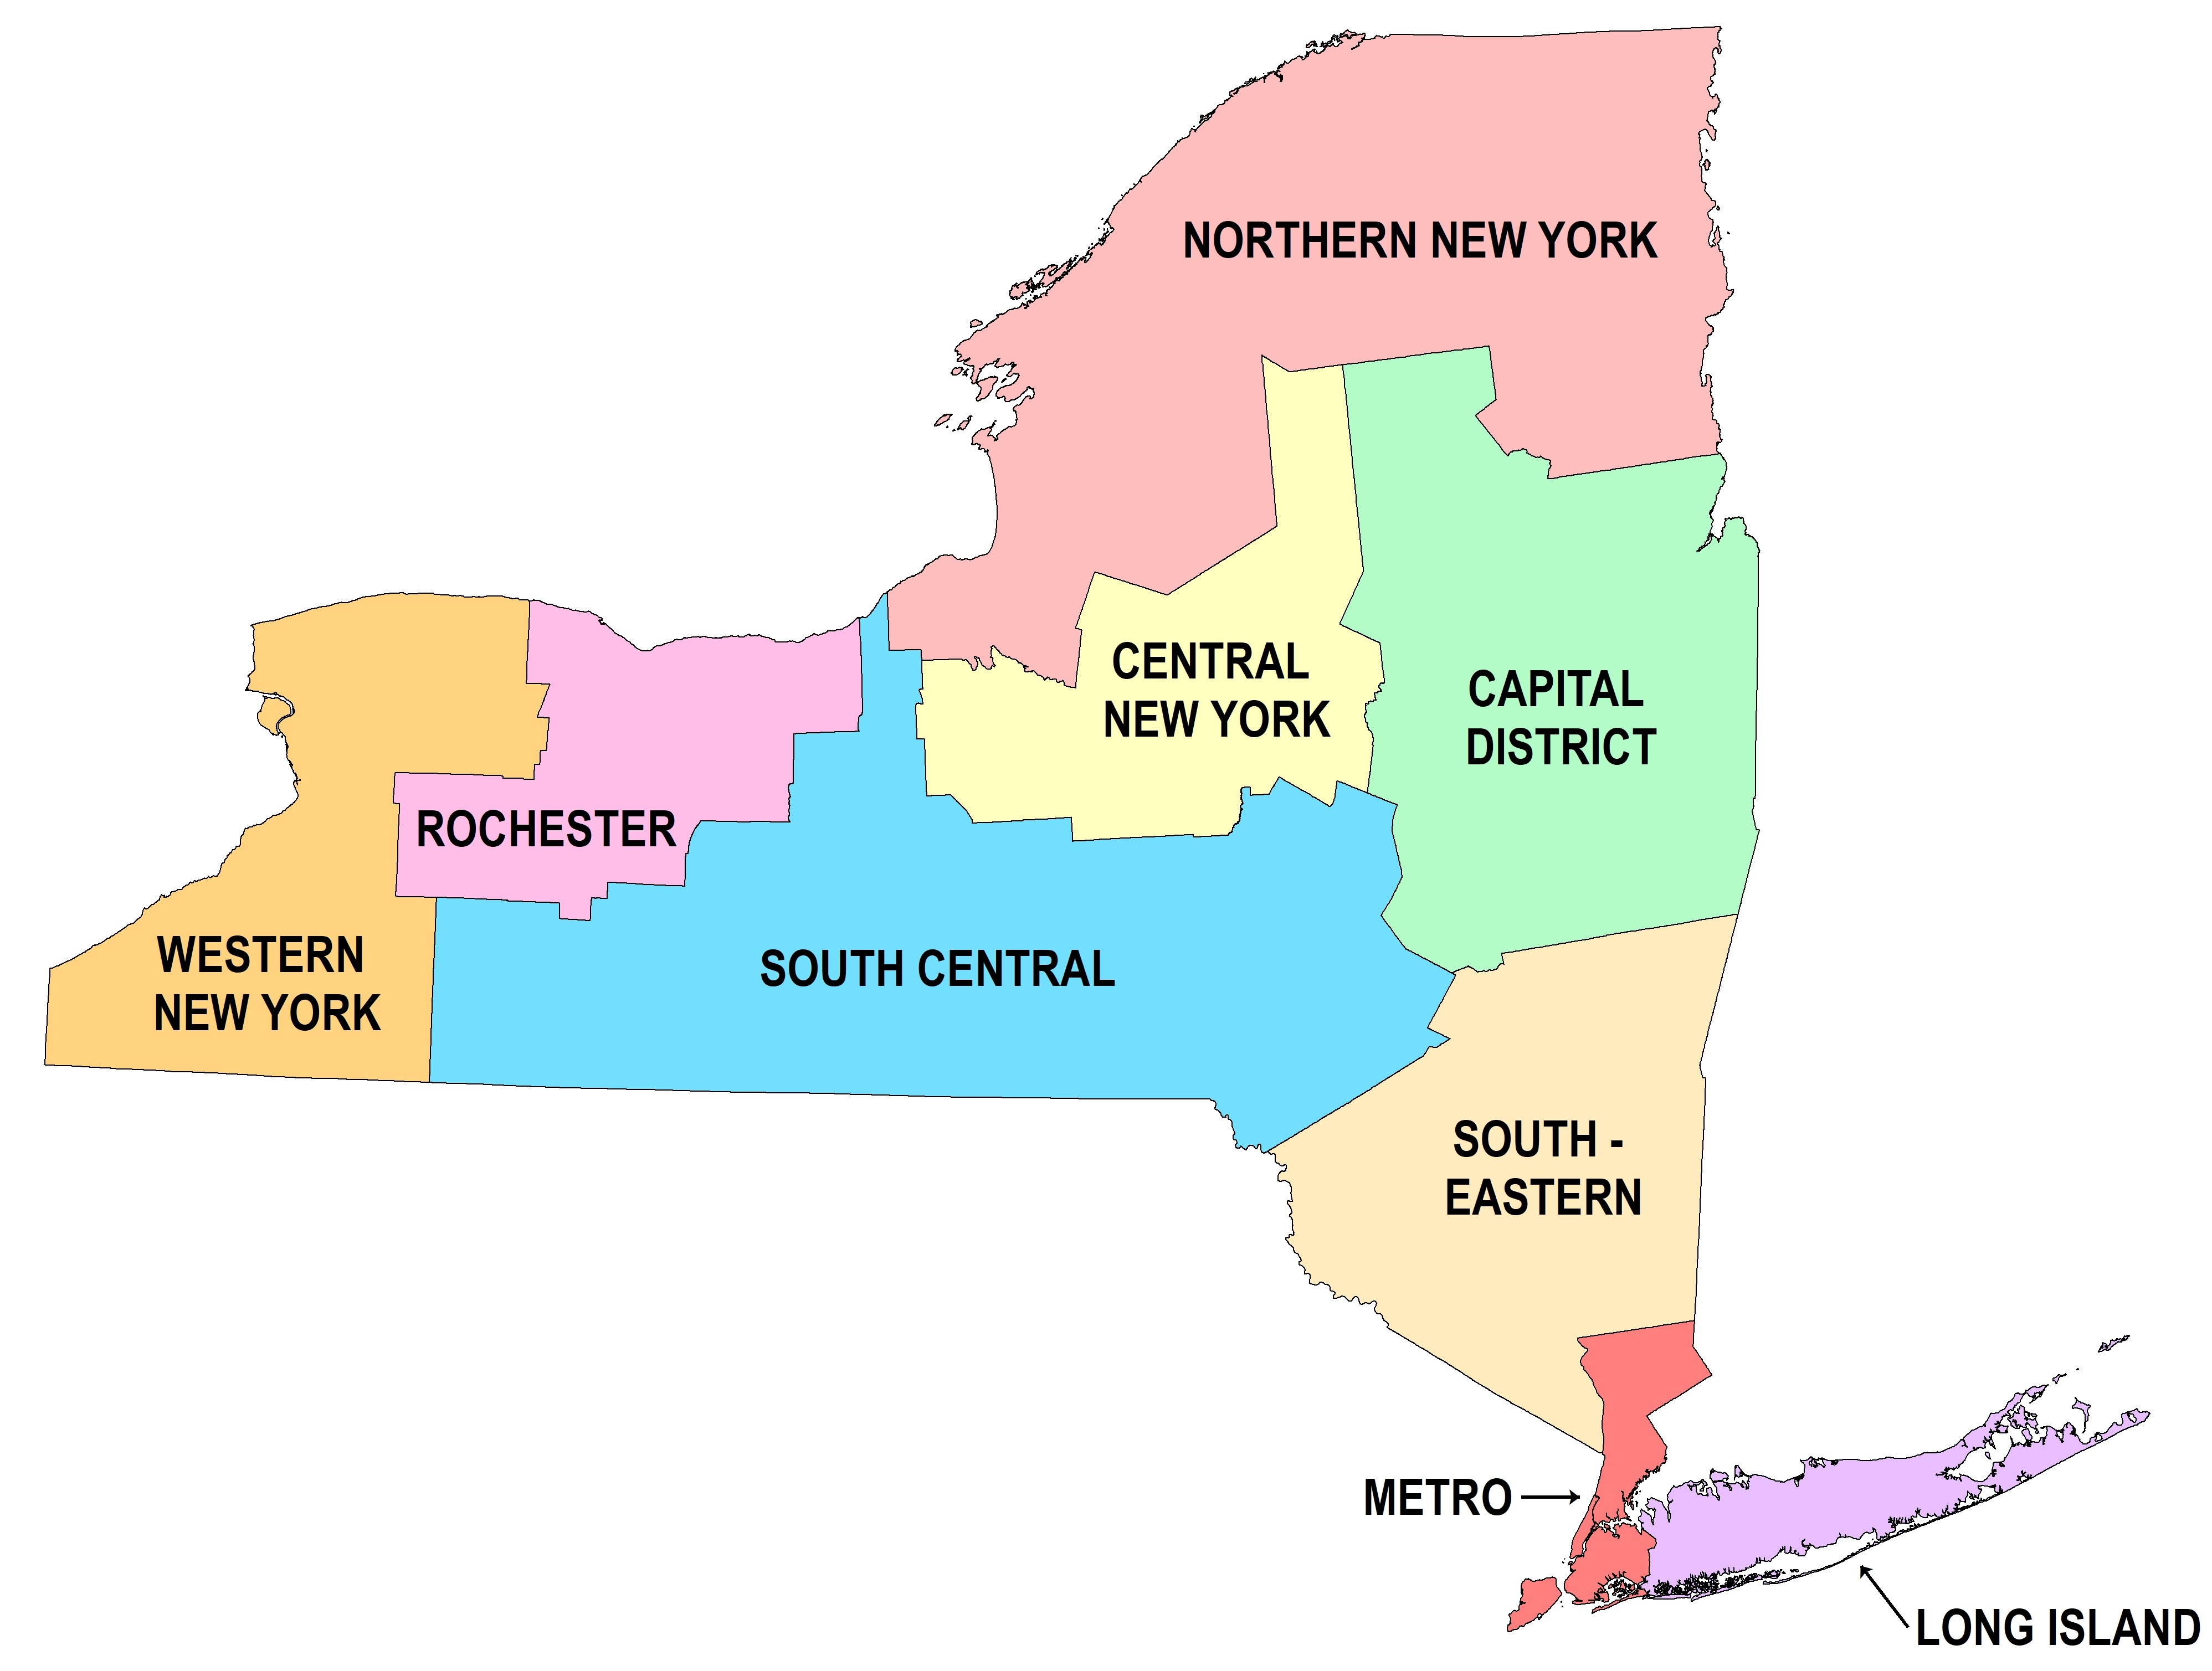 Image map of reference and research library resources systems in New York State; click on the image to go to the map